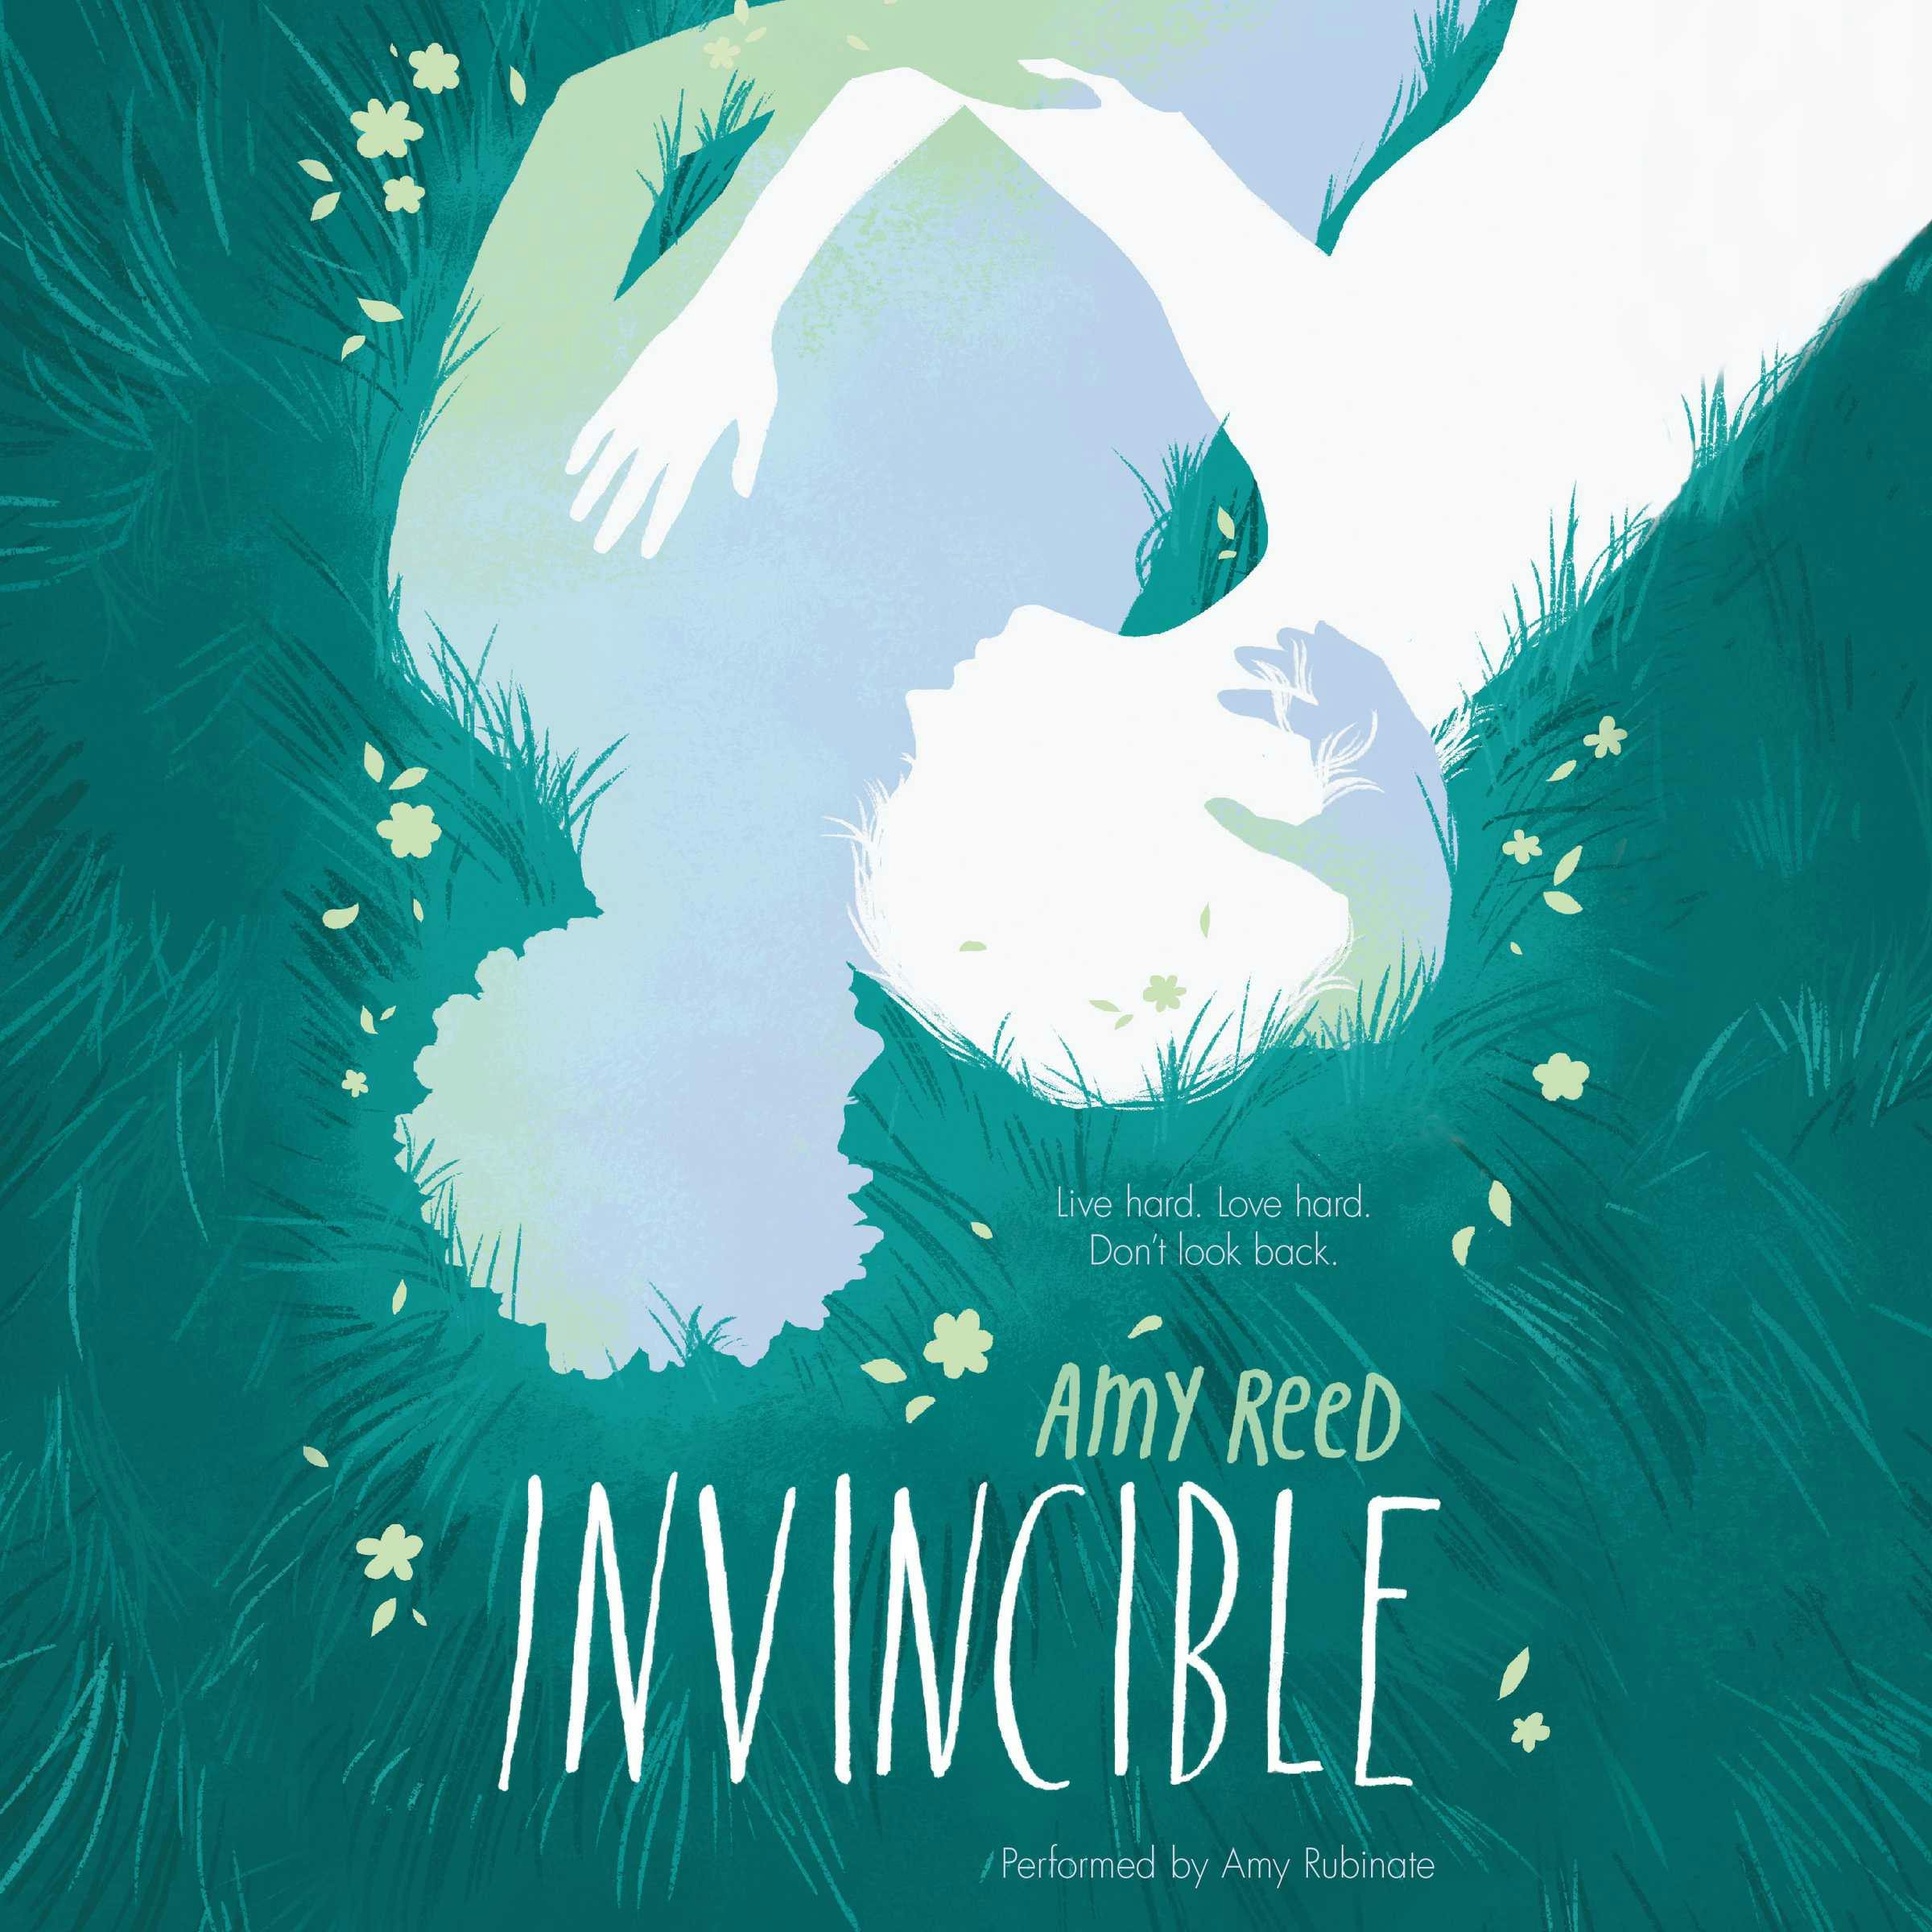 Invincible - undefined